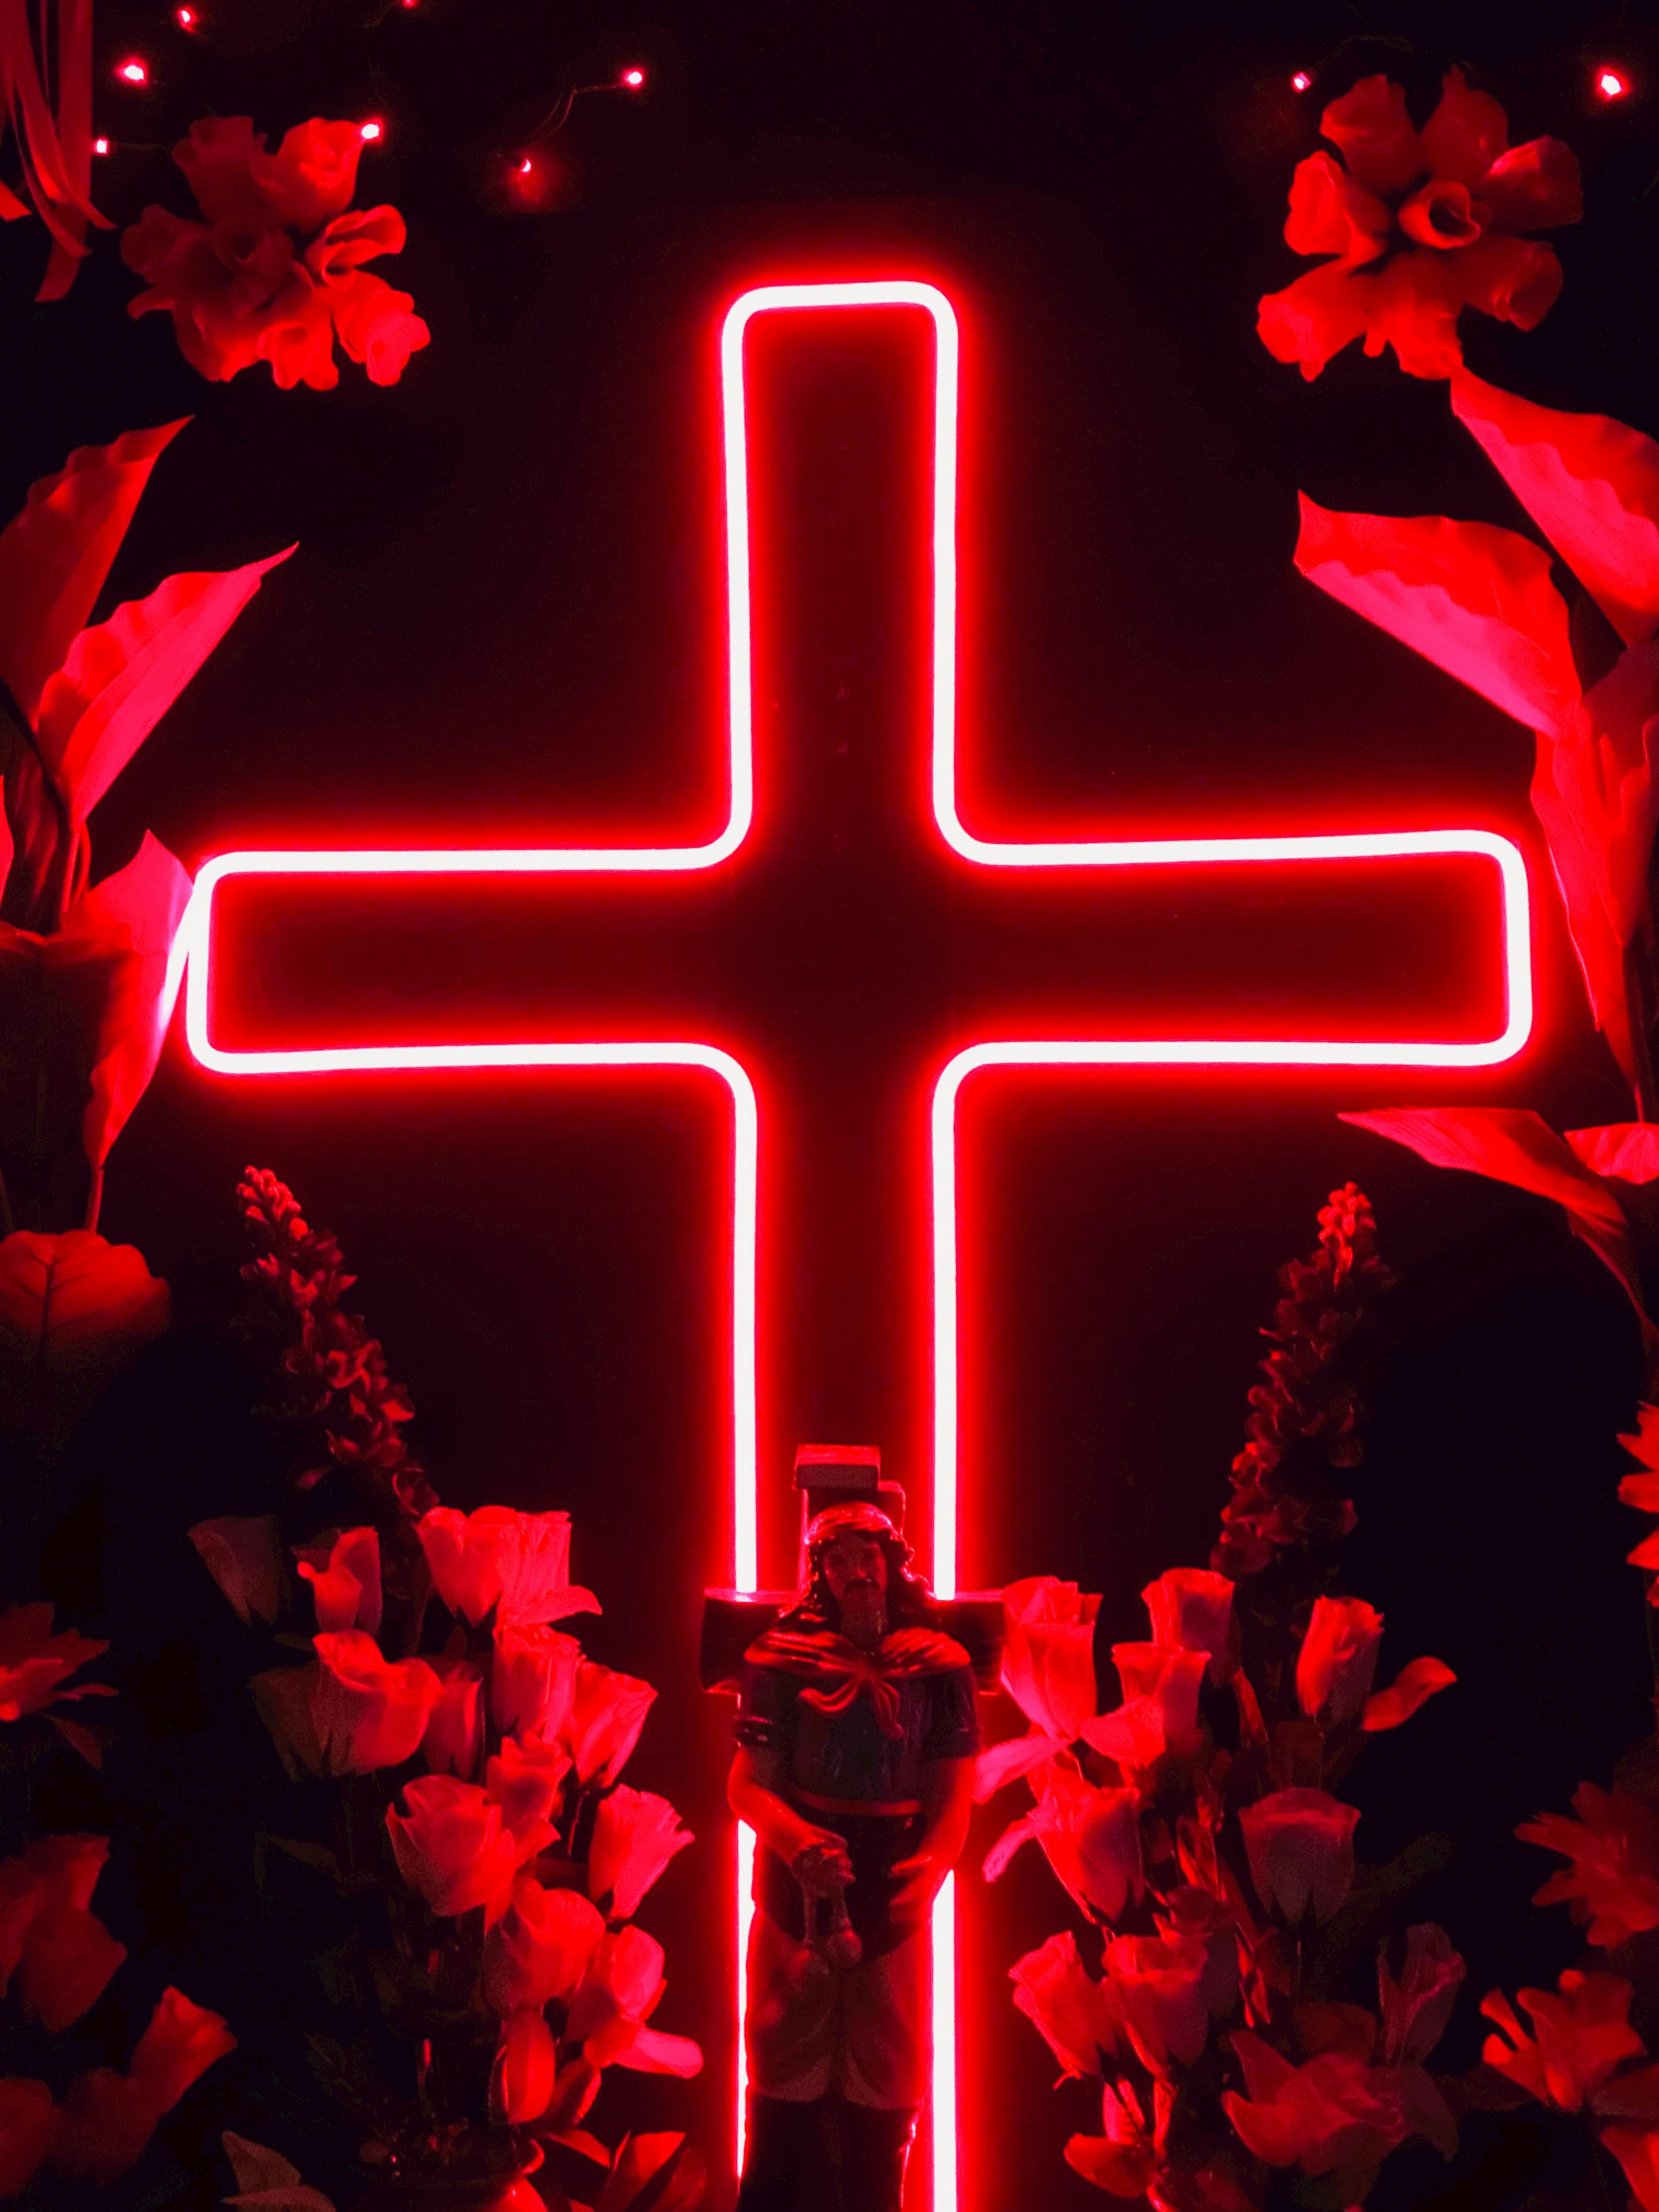 Stylized Crosses High-Res Vector Graphic - Getty Images